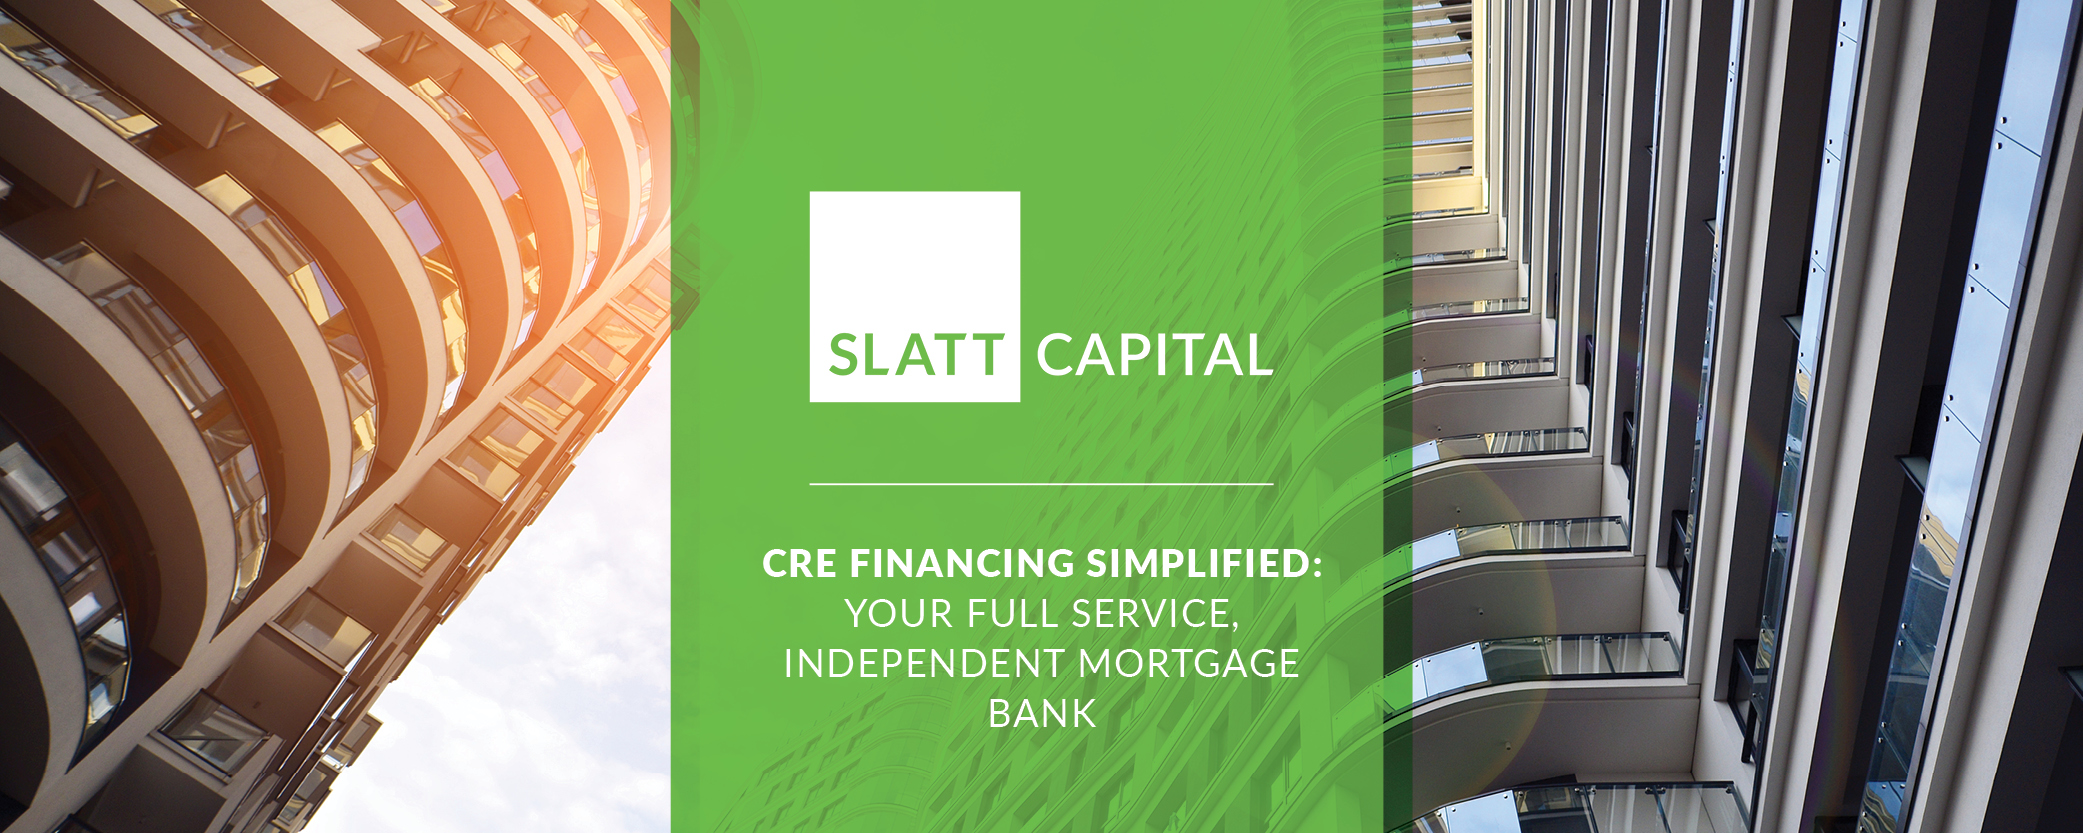 Cre financing simplified: your full service, independent mortgage bank